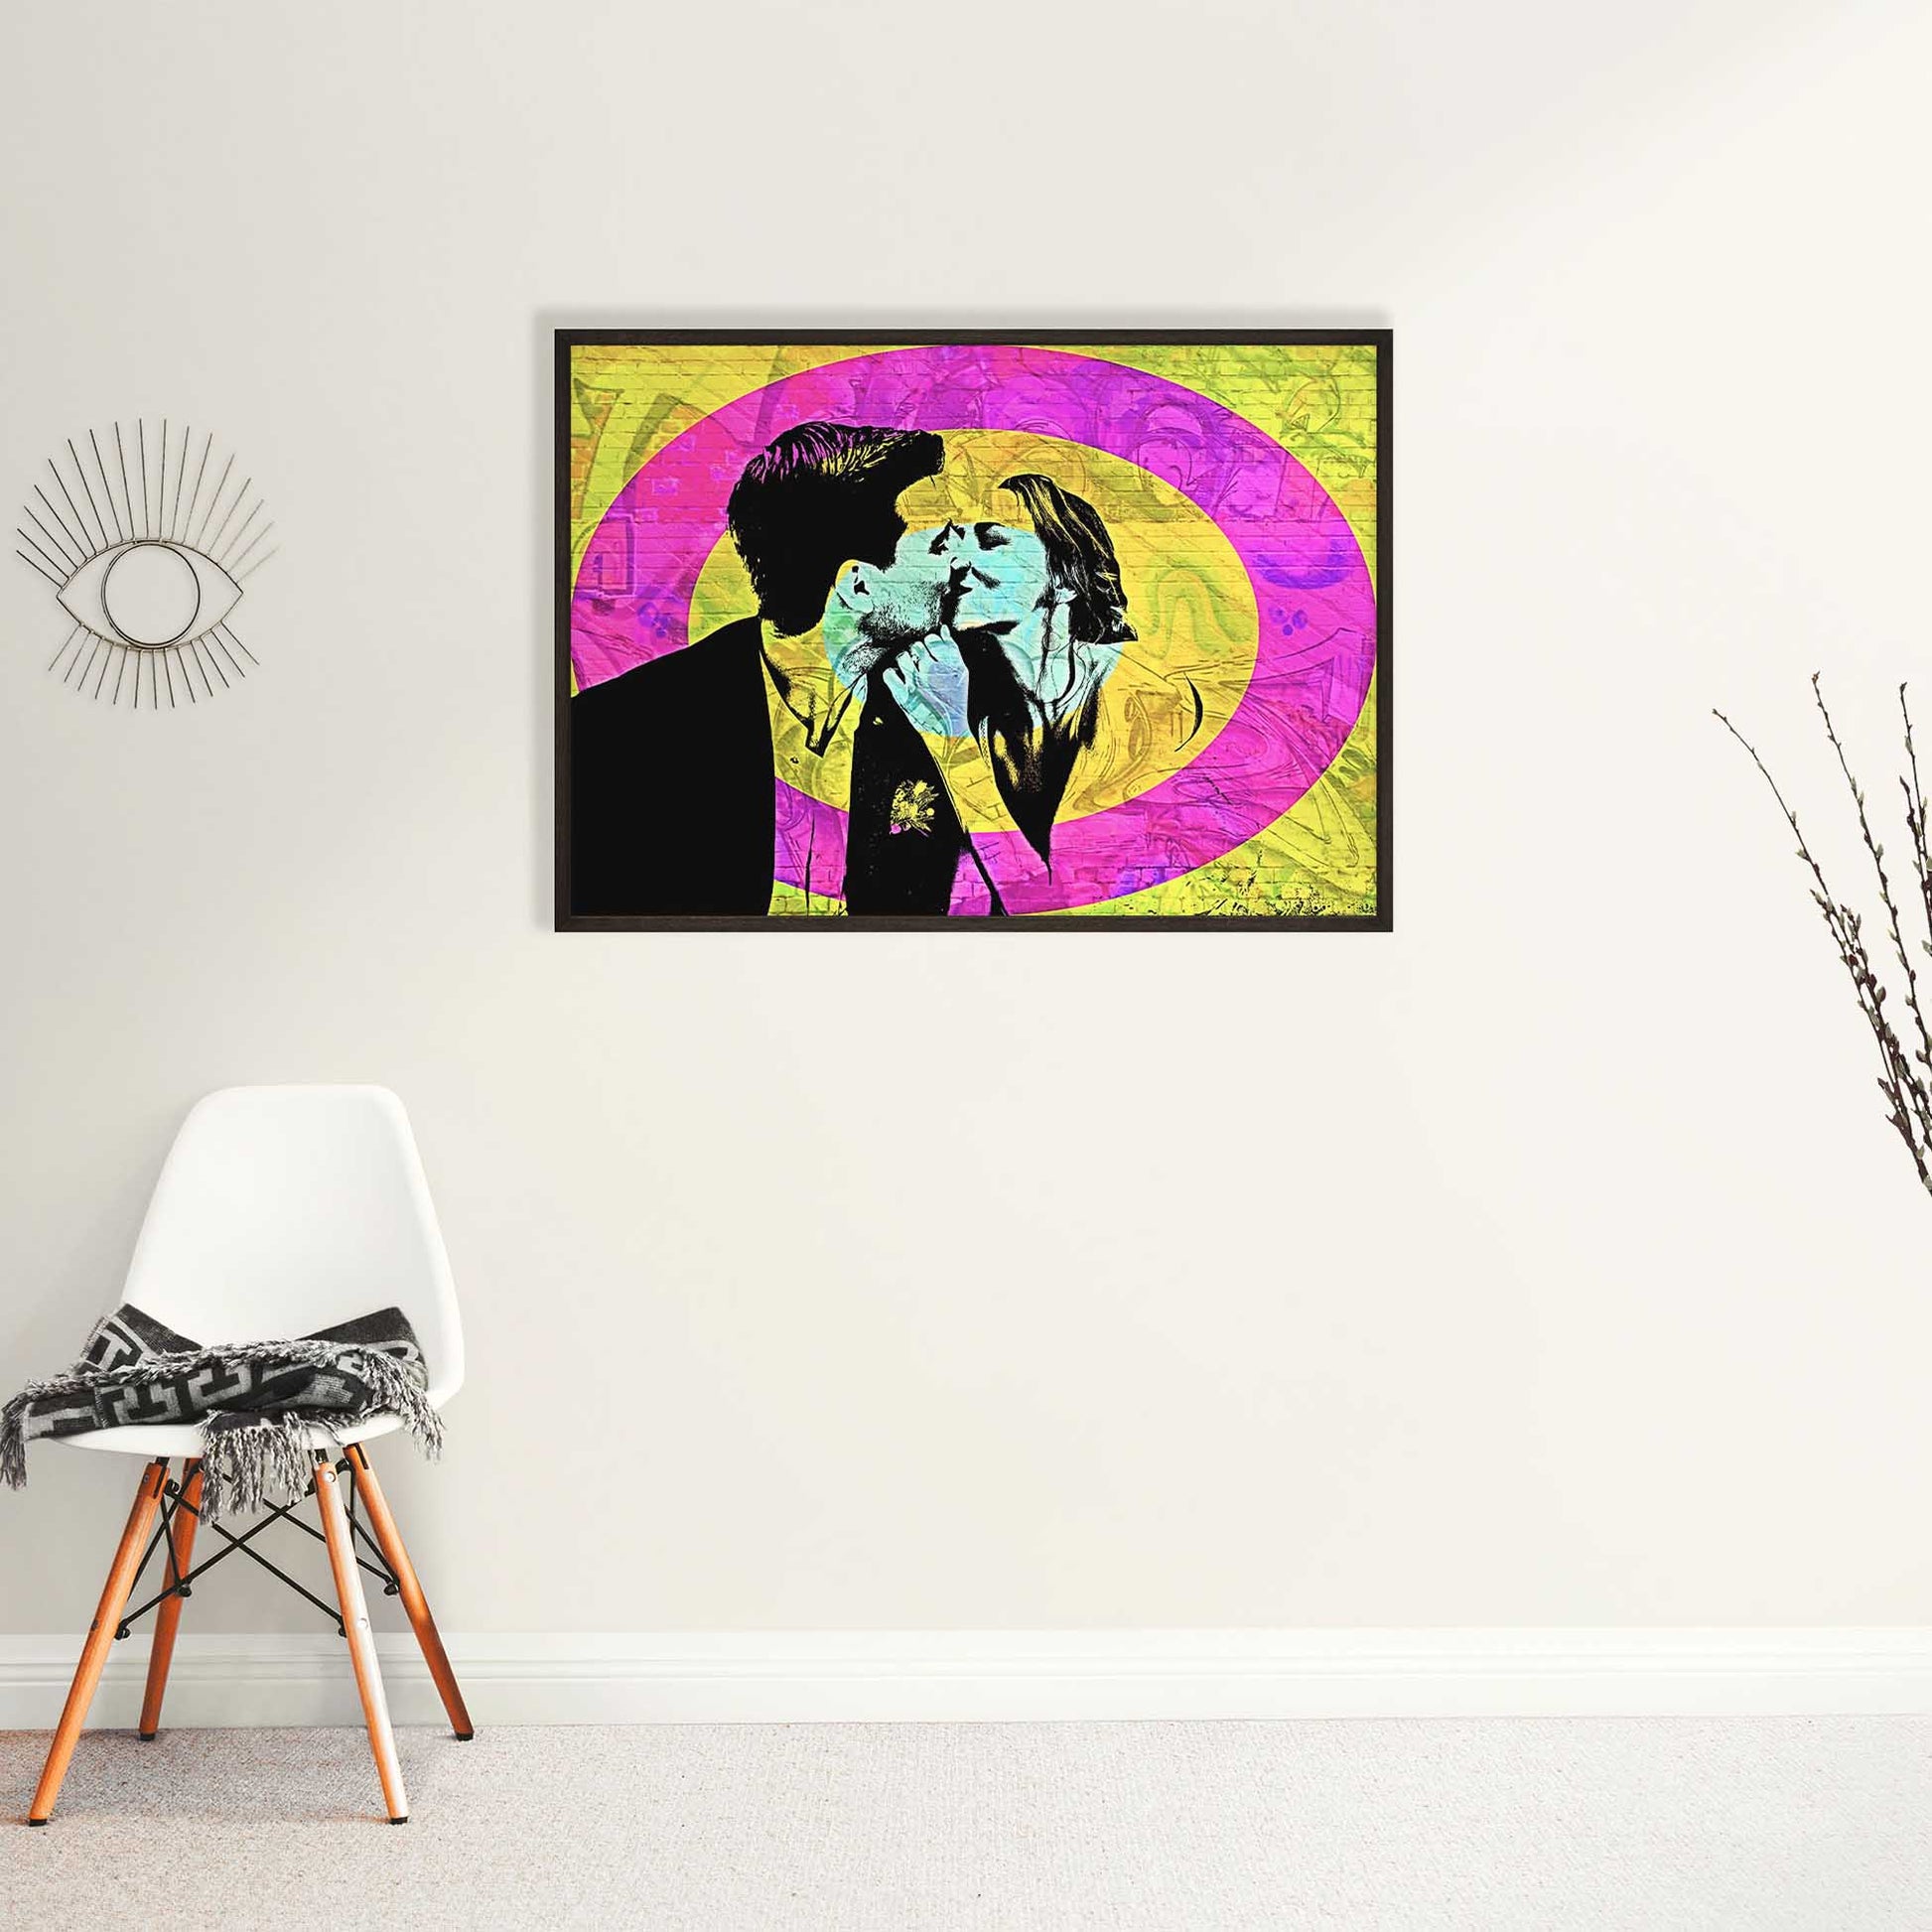 Elevate your home decor with our Personalised Graffiti Street Art Print. Inspired by the urban landscape, this print showcases a realistic brick texture and vibrant colors, including shades of pink, yellow, and blue. Created by printing from photo